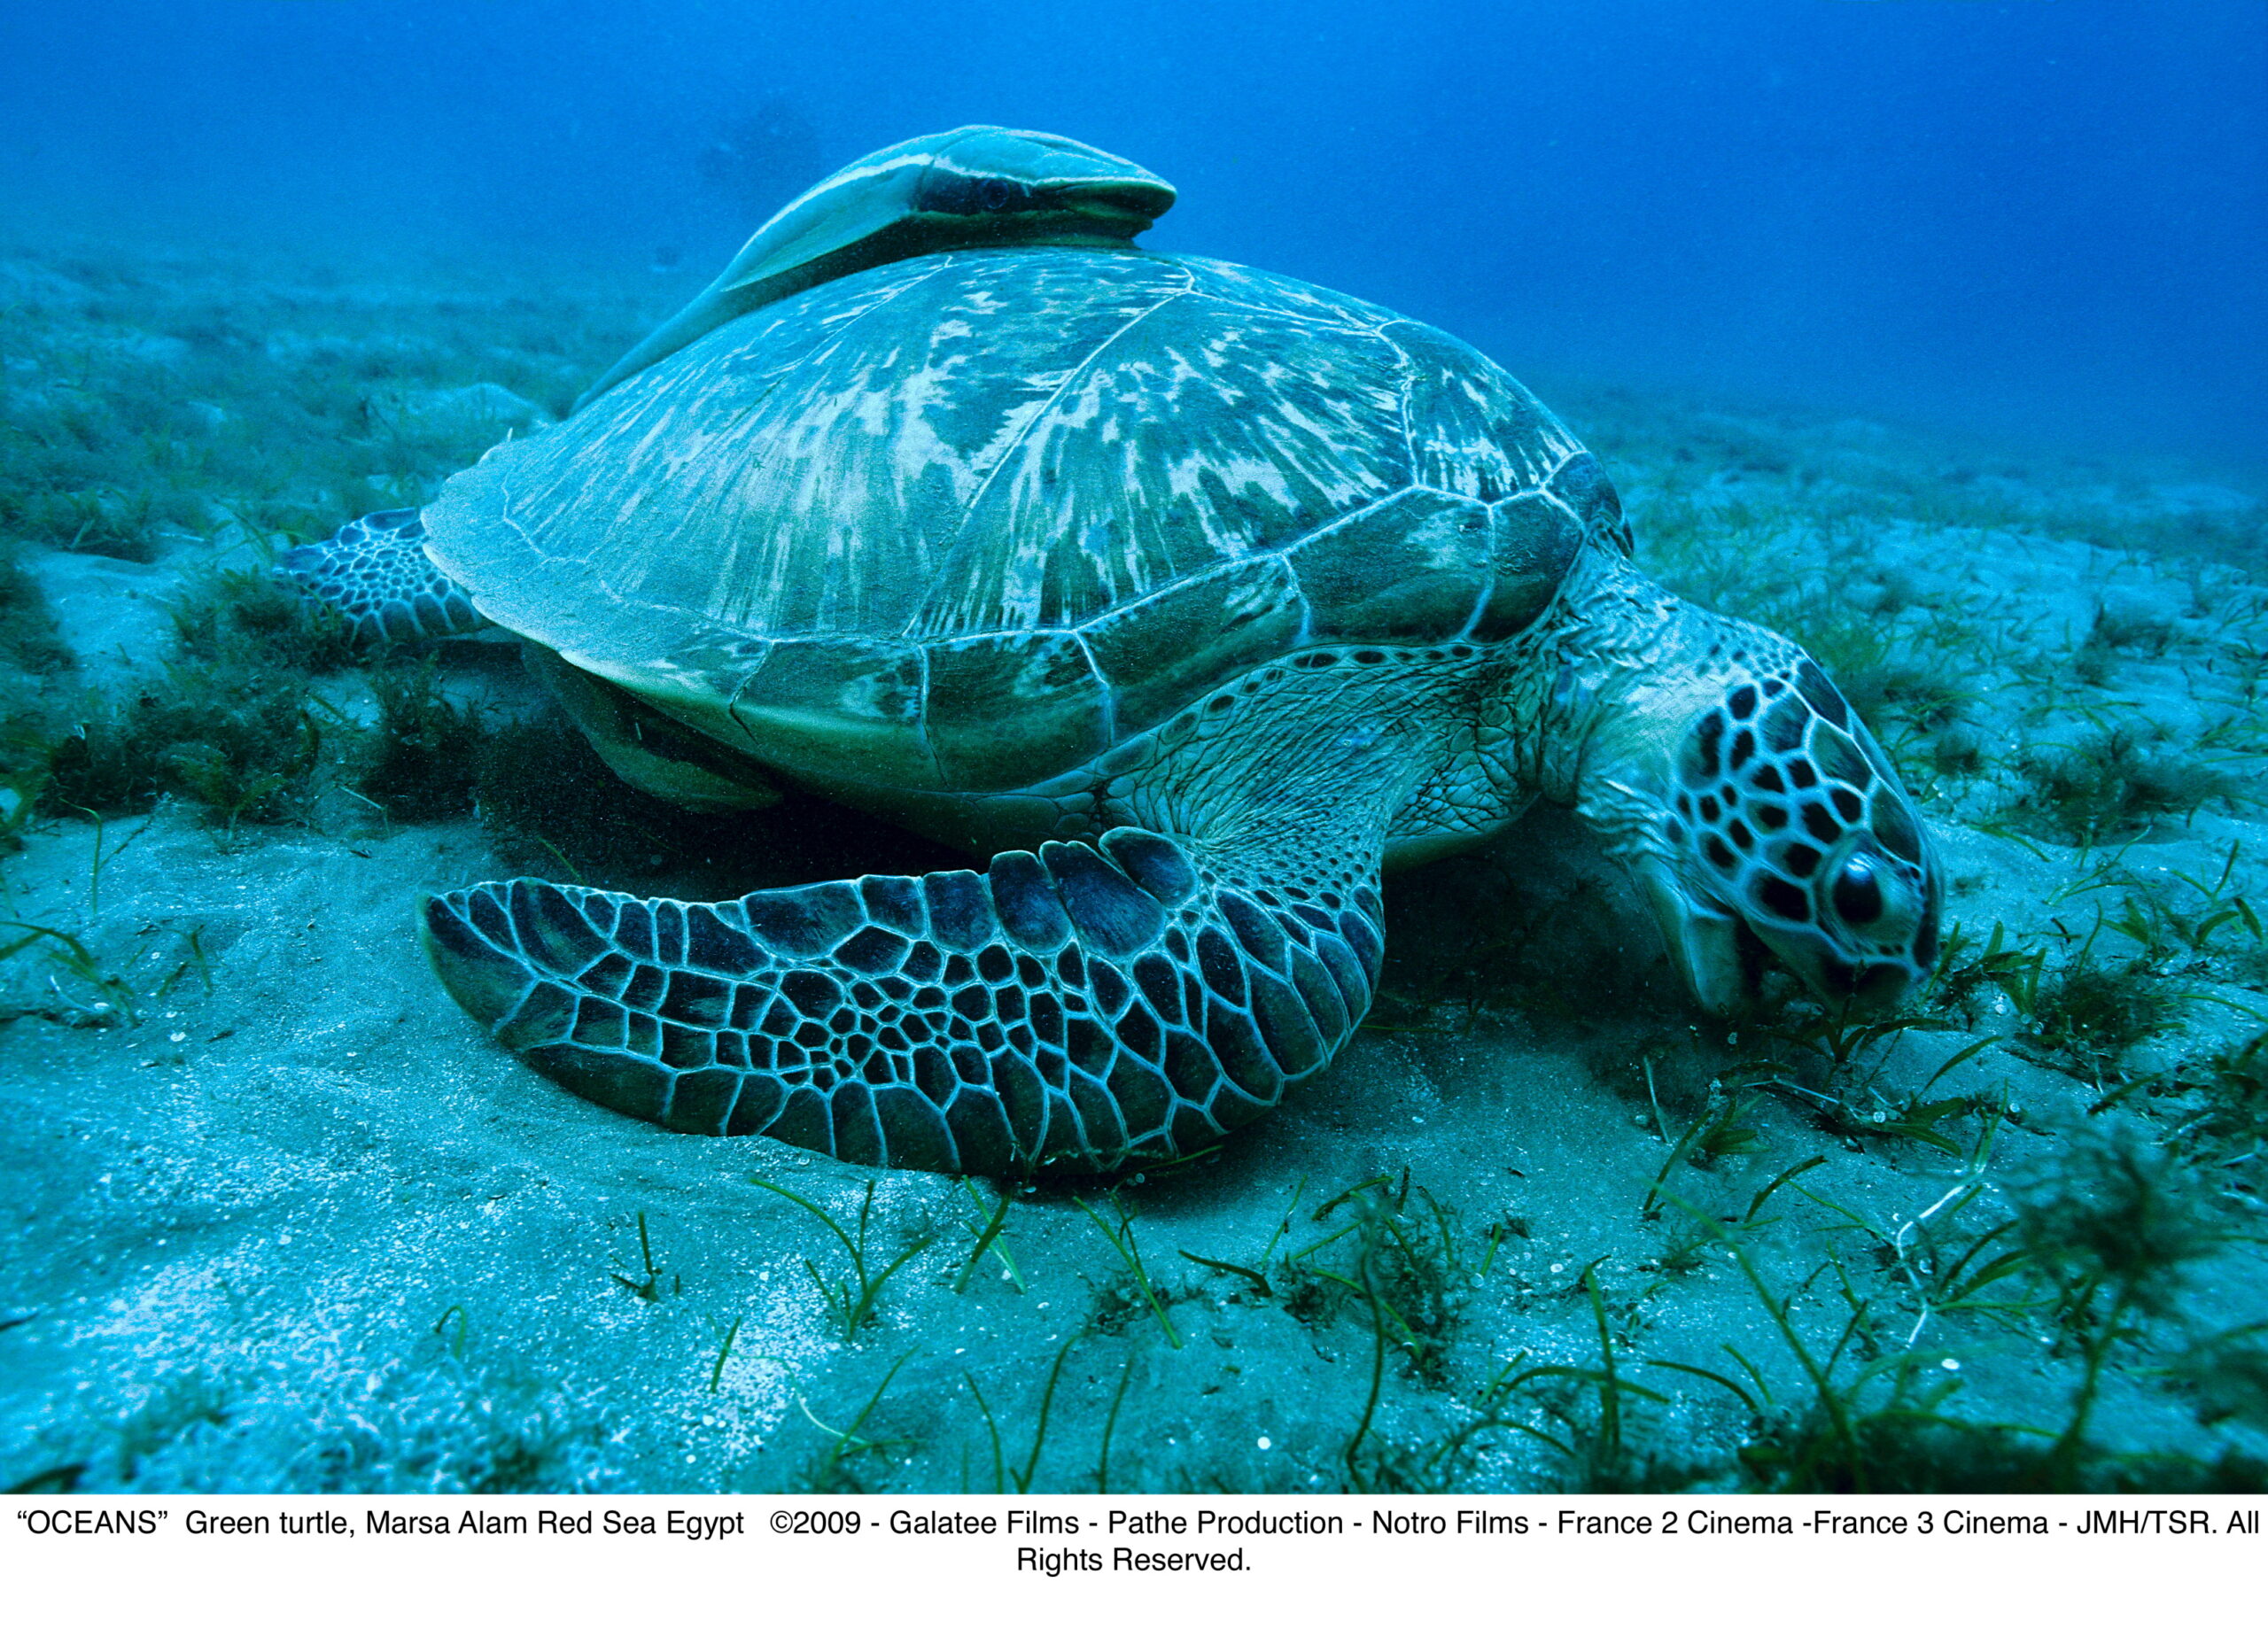 A sea turtle rests on the bottom of the sea